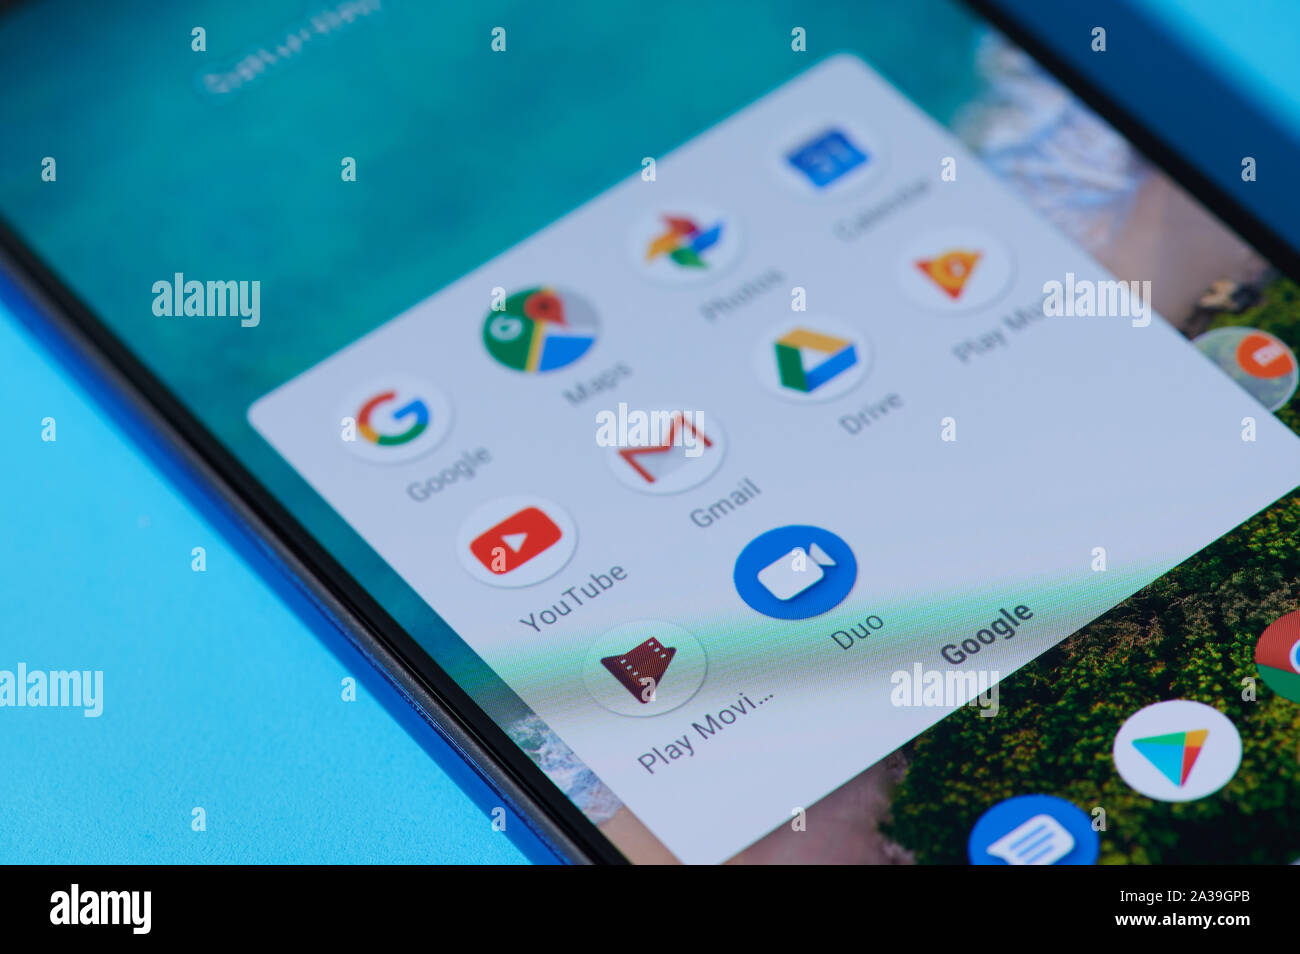 New york, USA - september 28, 2019:Google apps on smartphone on smartphone screen close up view Stock Photo